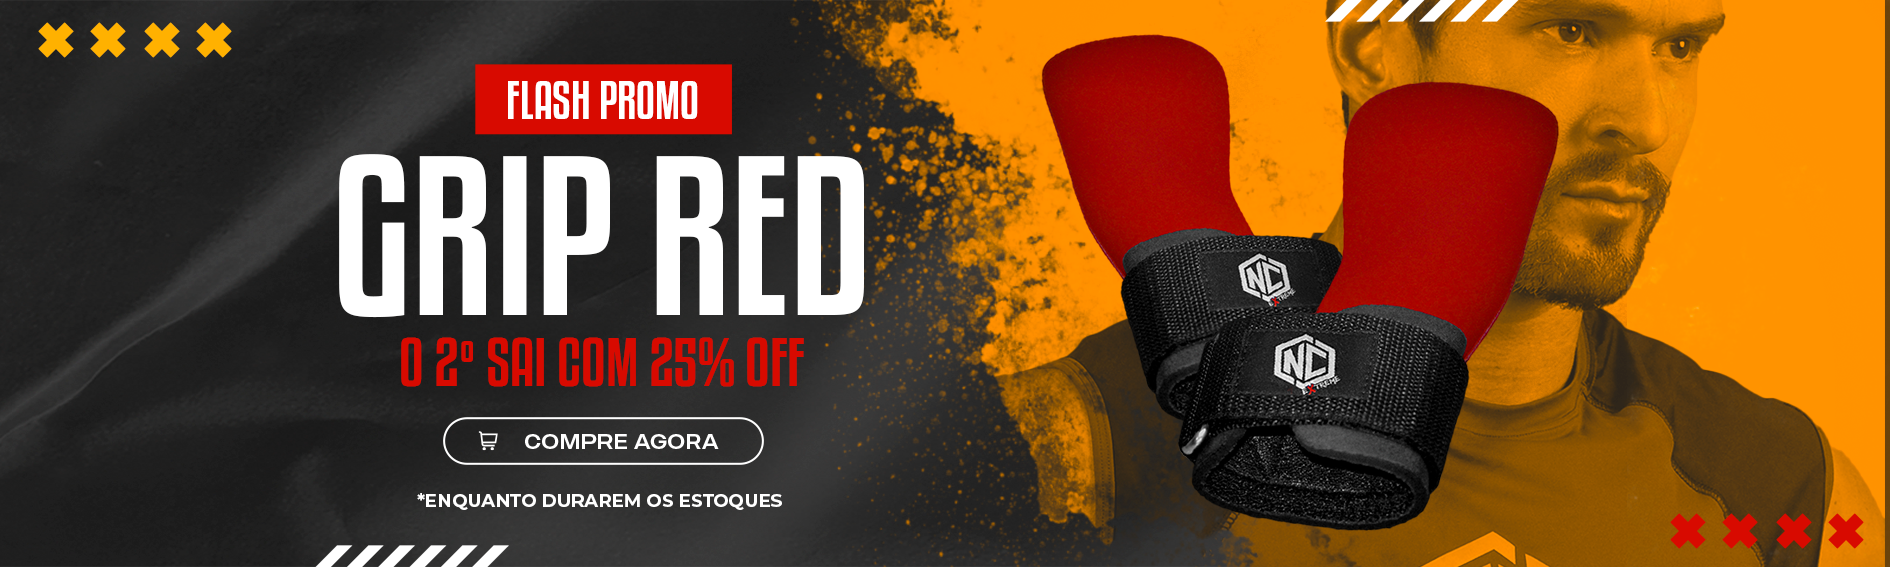 PROMOCAO GRIP RED